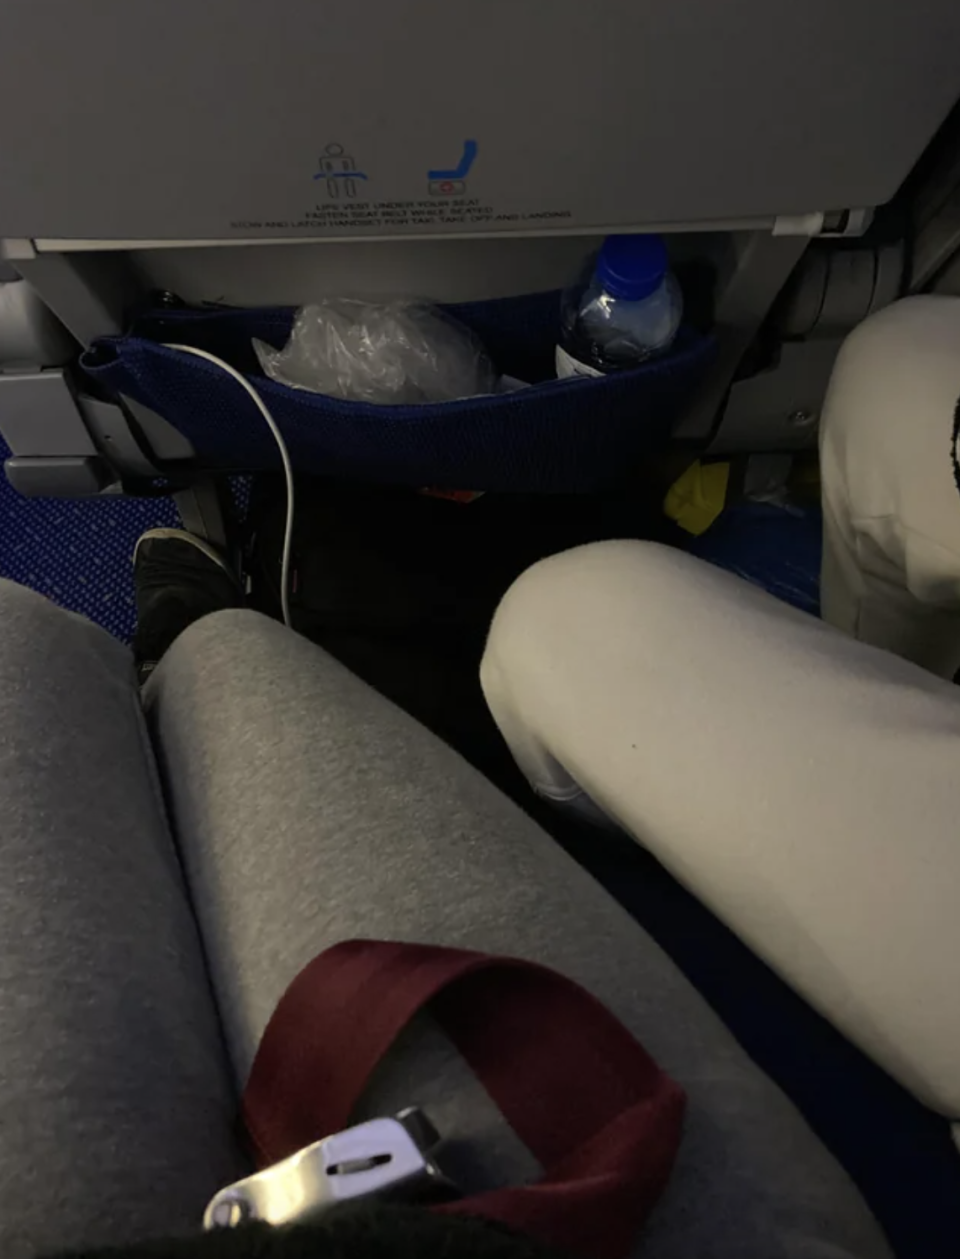 a man's legs in someone else's leg space on a plane